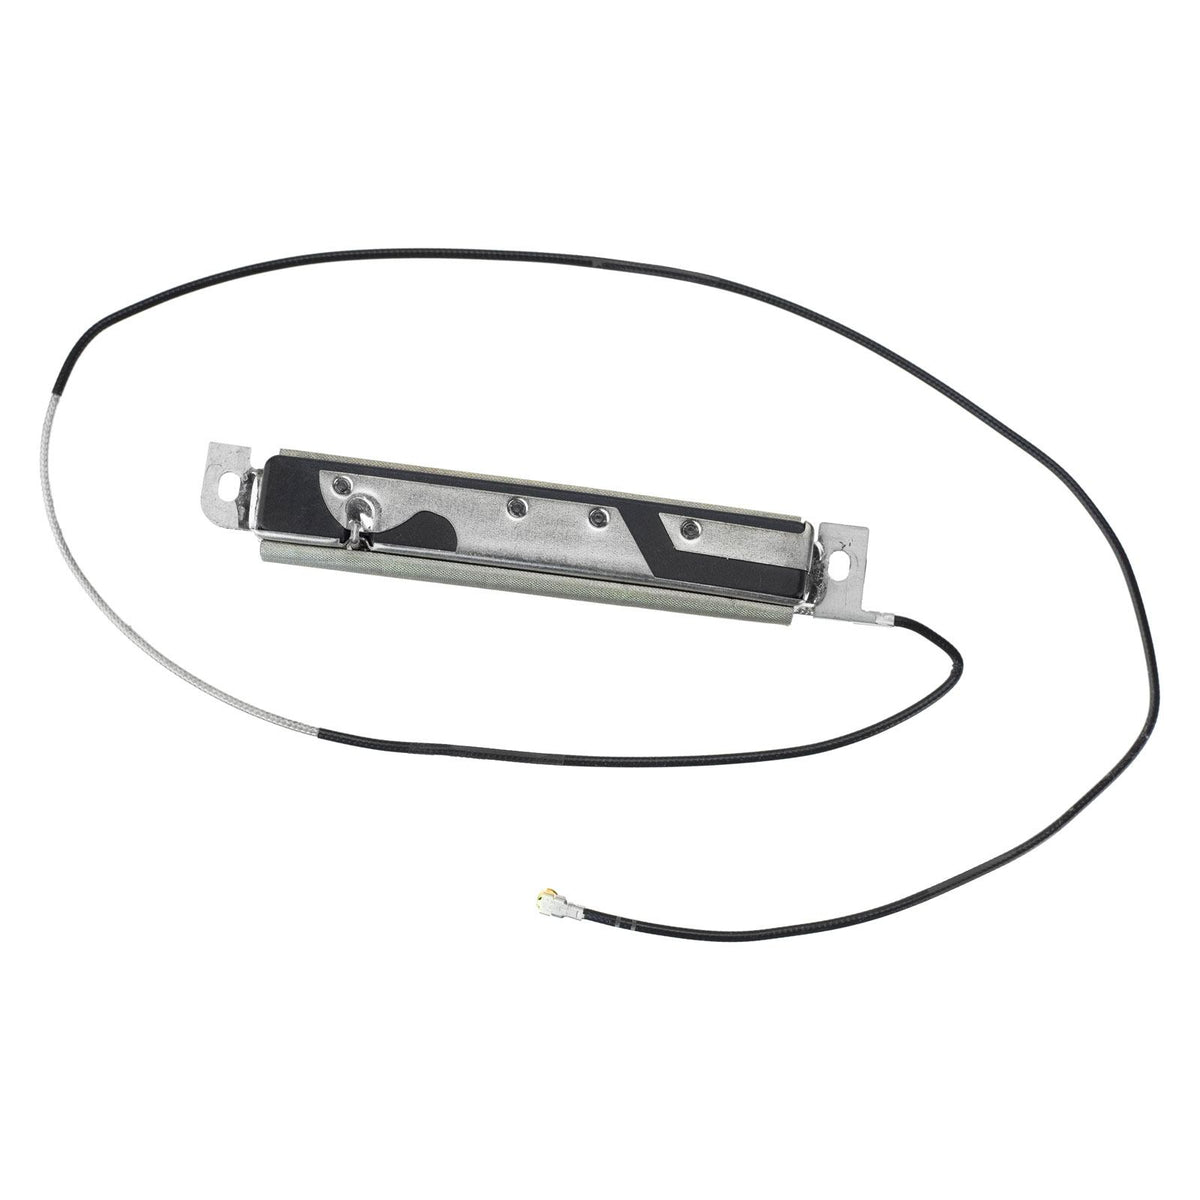 LEFT AIRPORT ANTENNA CABLE  FOR IMAC 21.5" A1311 (MID 2011 - LATE 2011)